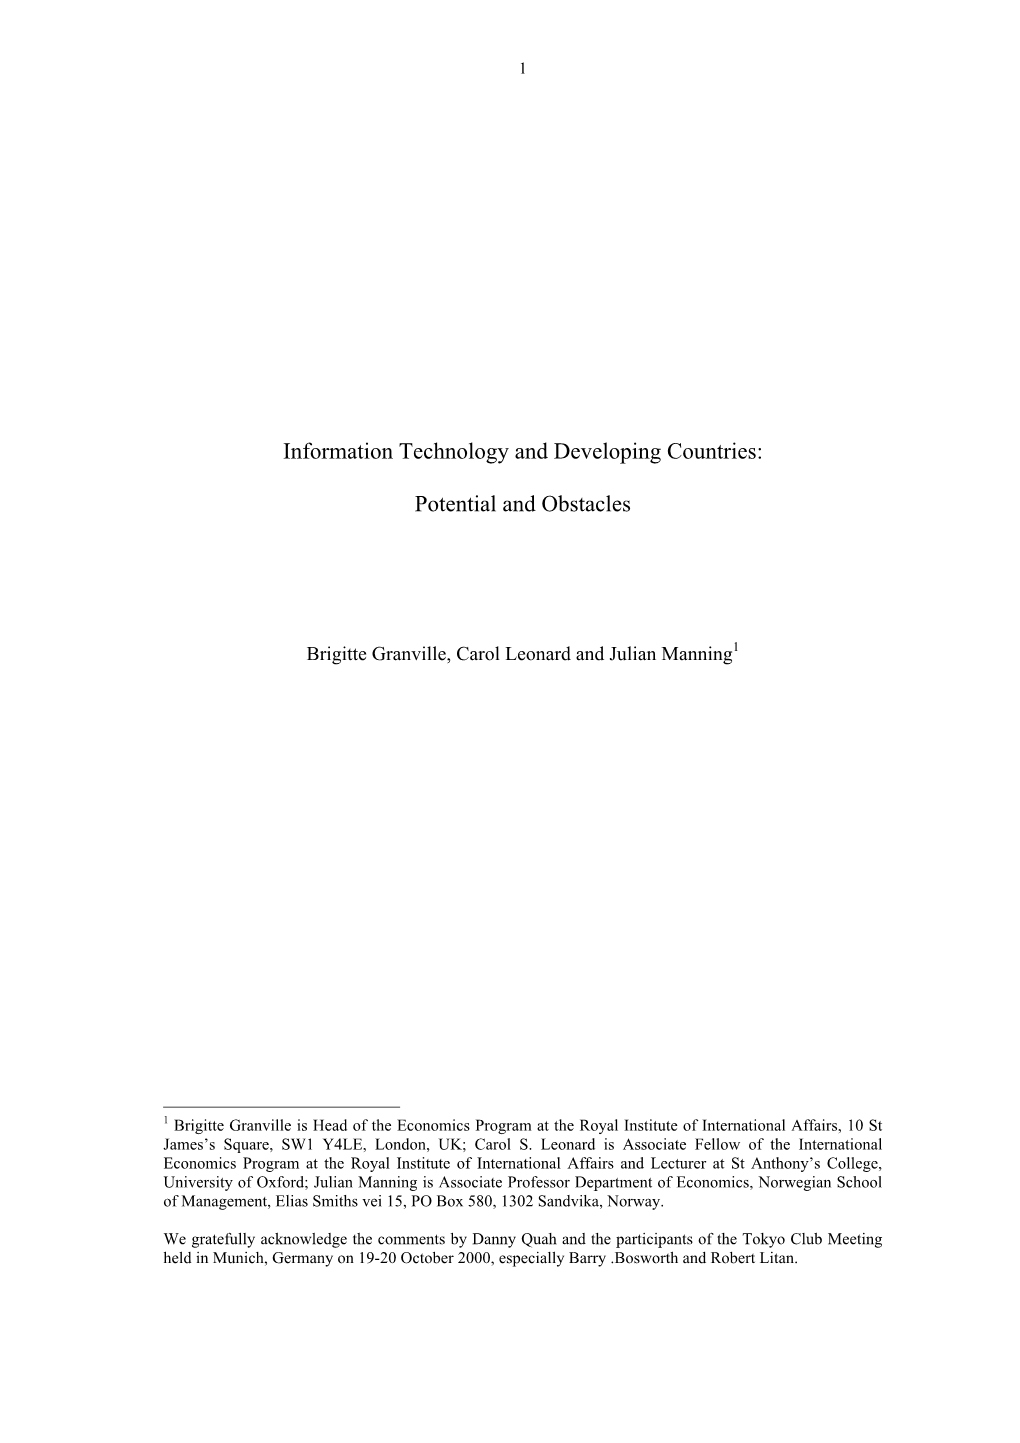 Information Technology and Developing Countries: Potential